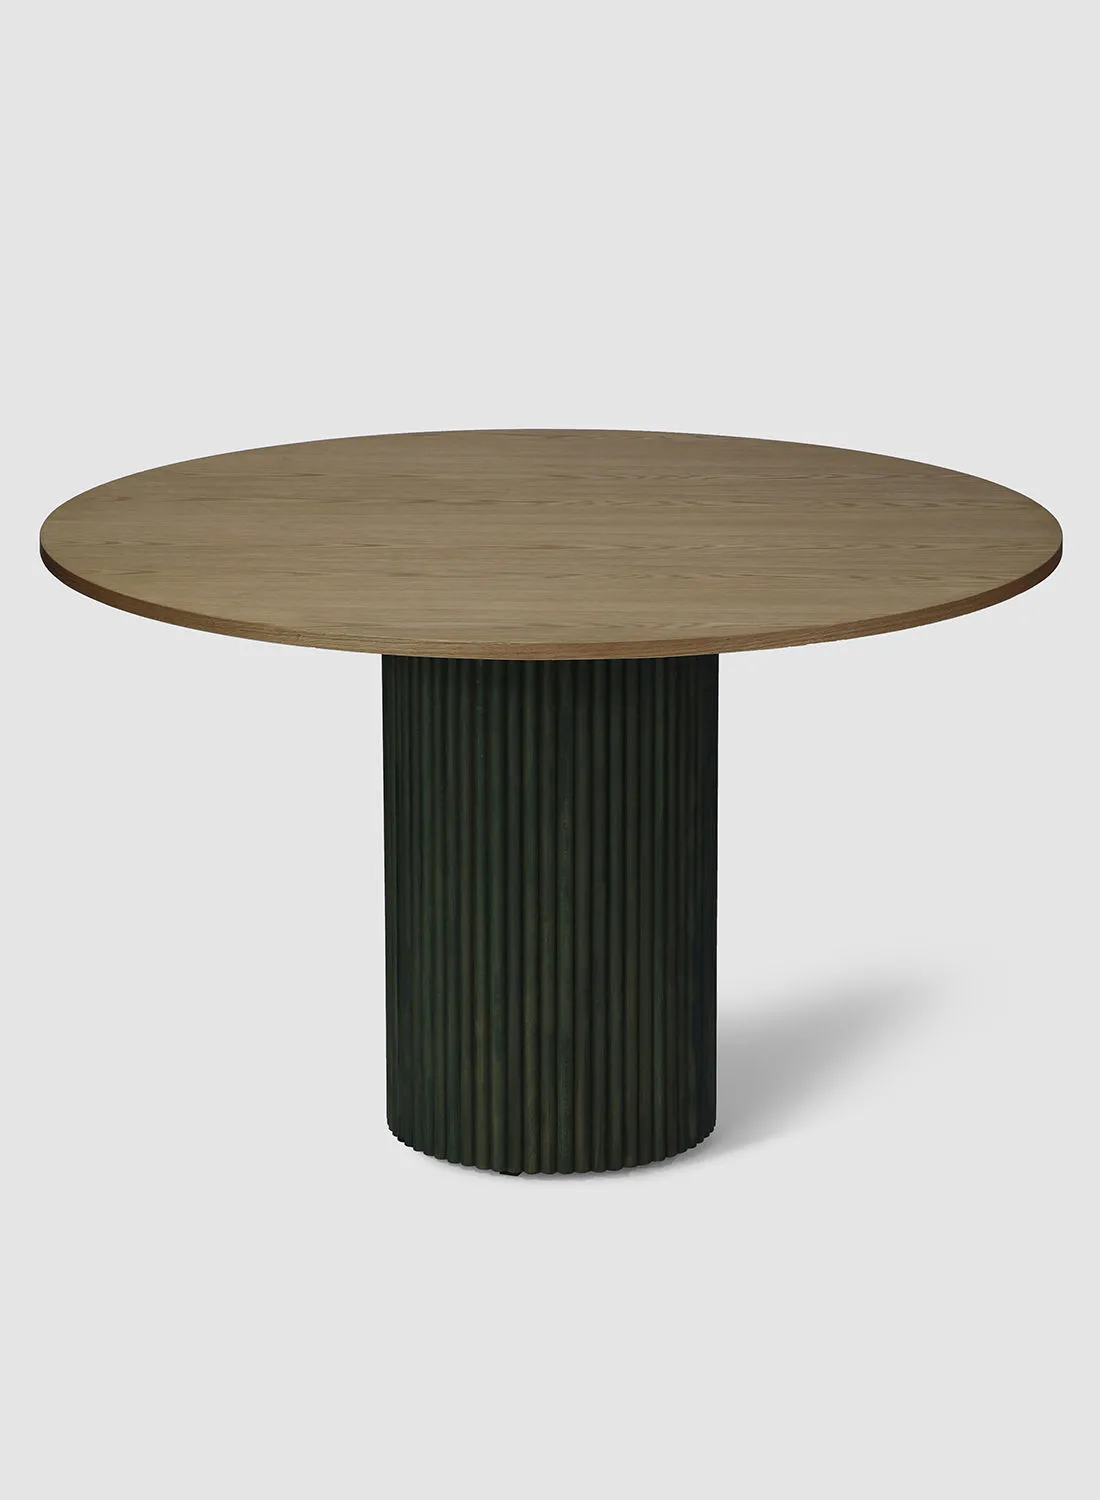 ebb & flow Dining Table Luxurious - 4 Seater - Green/Brown Hadley Collection Lacquered 1200X750 Round